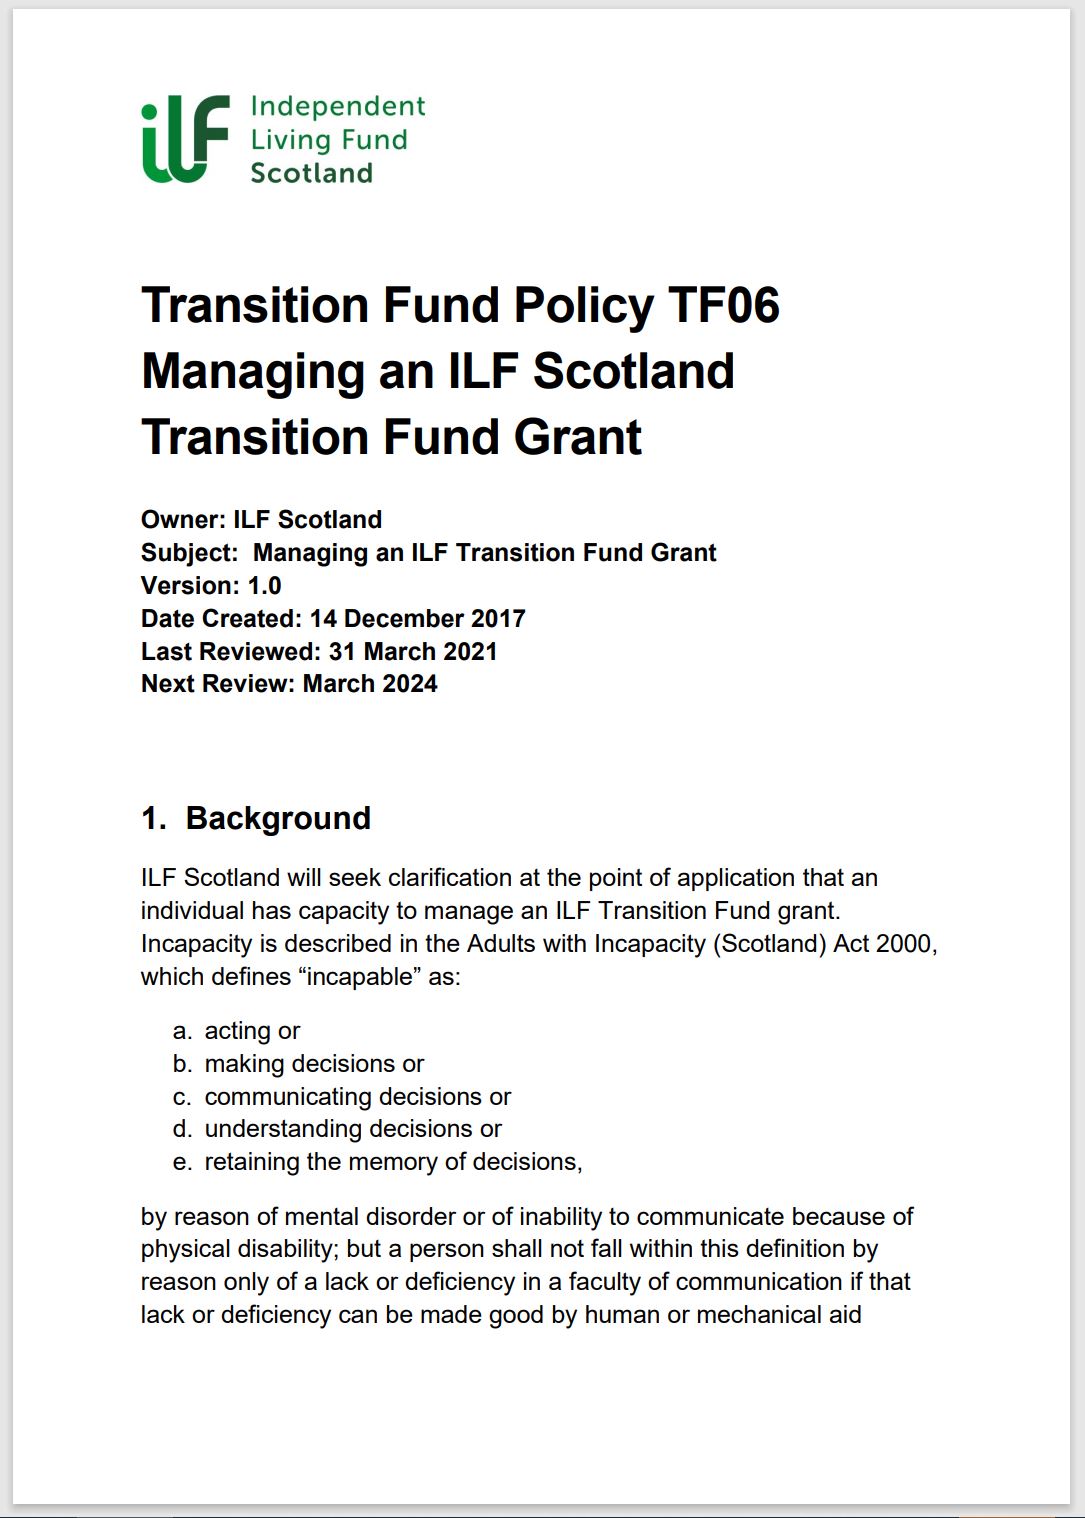 Cover page for policy TF06 showing ILF Scotland logo and cover page text.